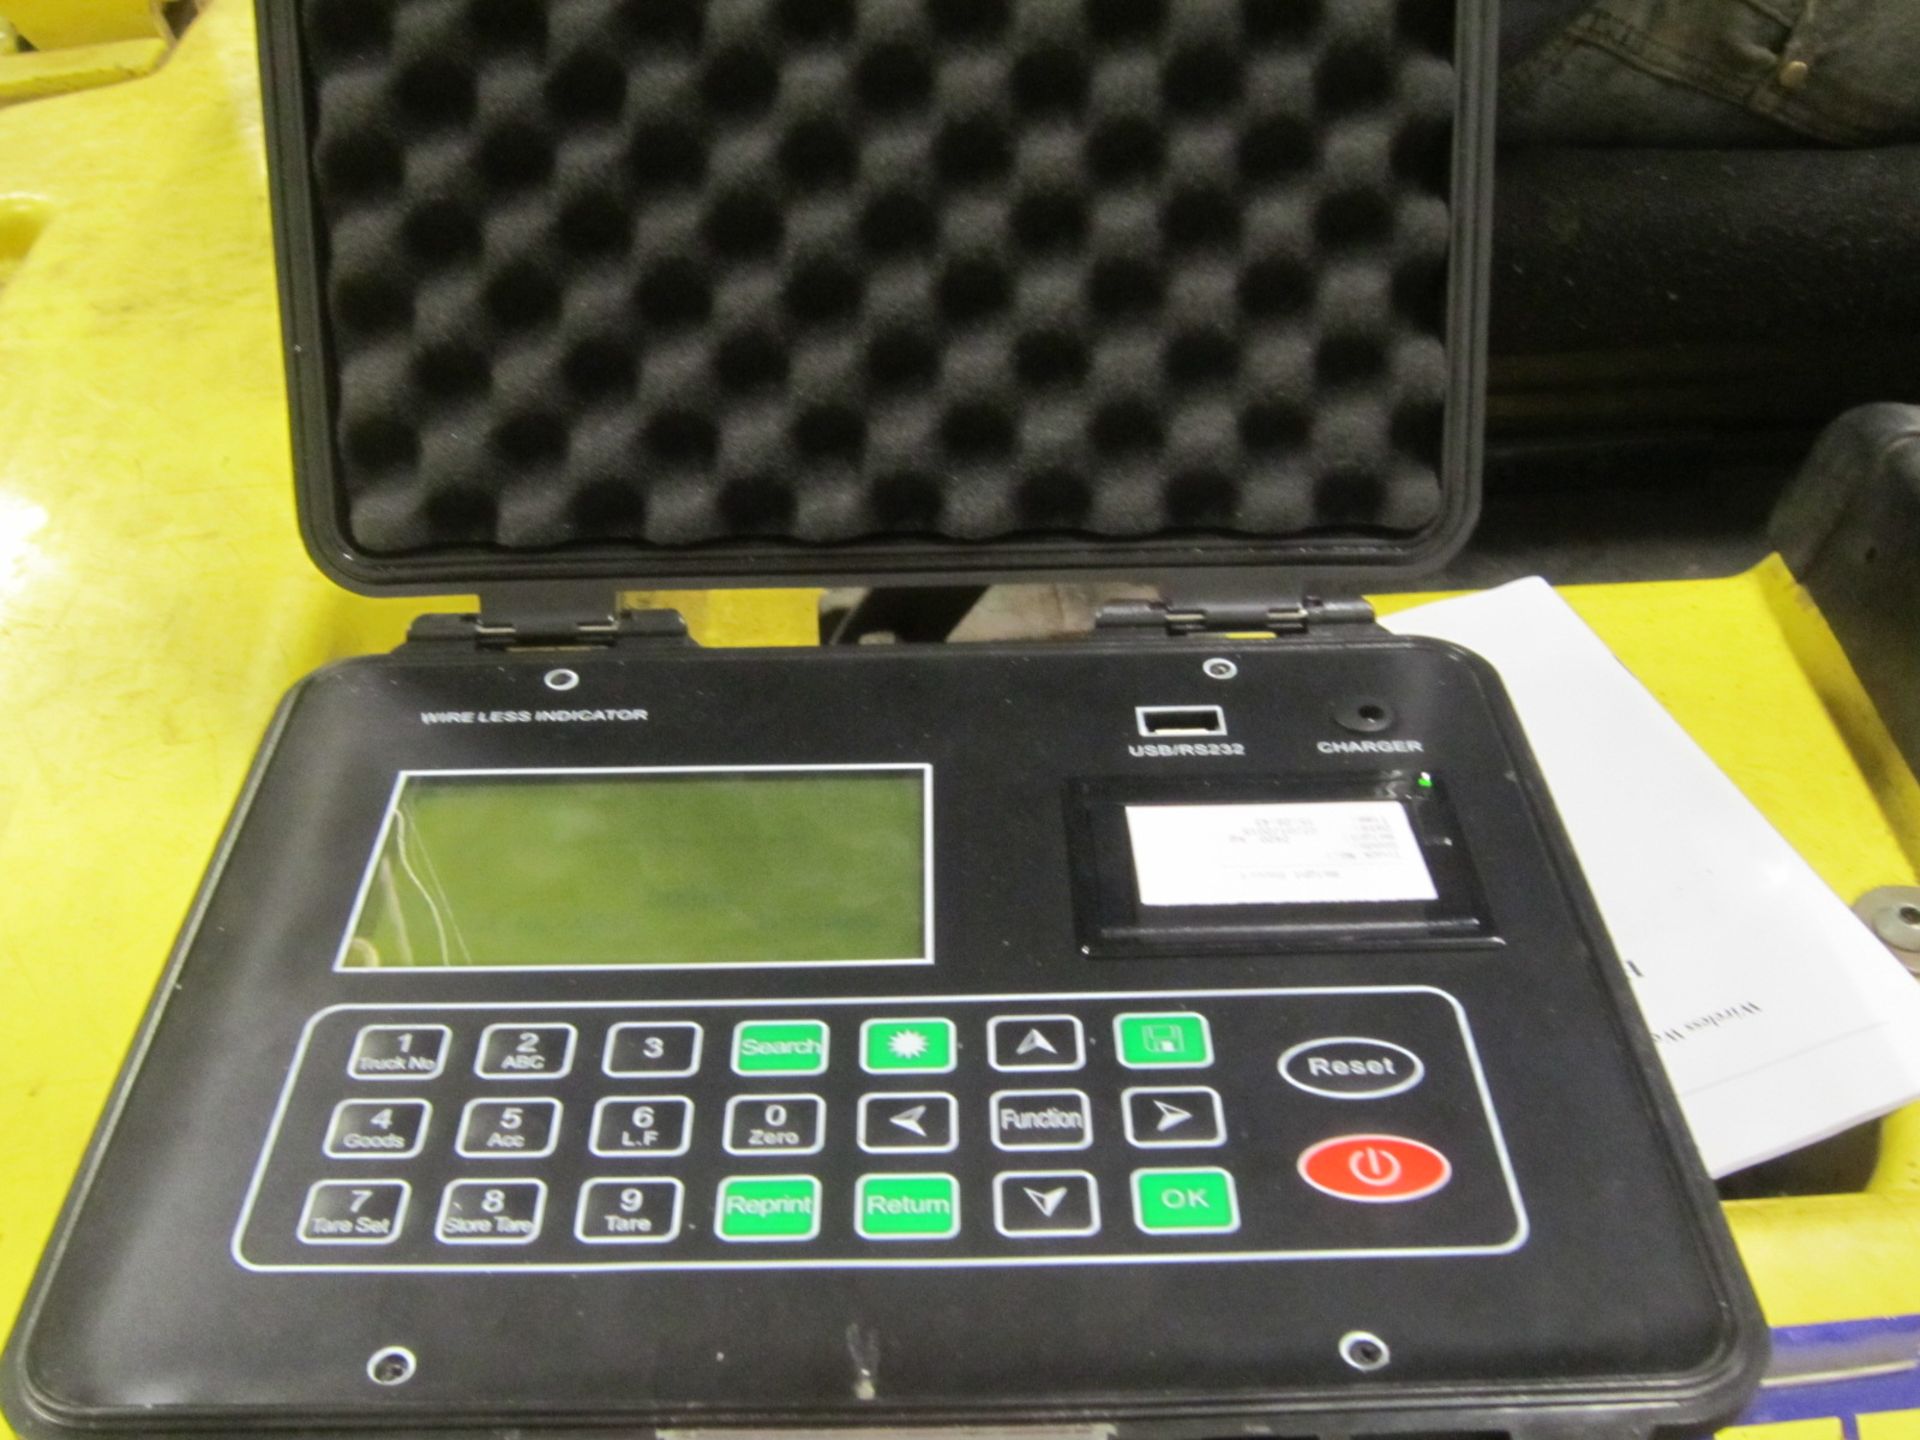 RW 10 TON Wireless Crane Scale with Digital Readout in Breifcase with charger up to 20000lbs - Image 2 of 2